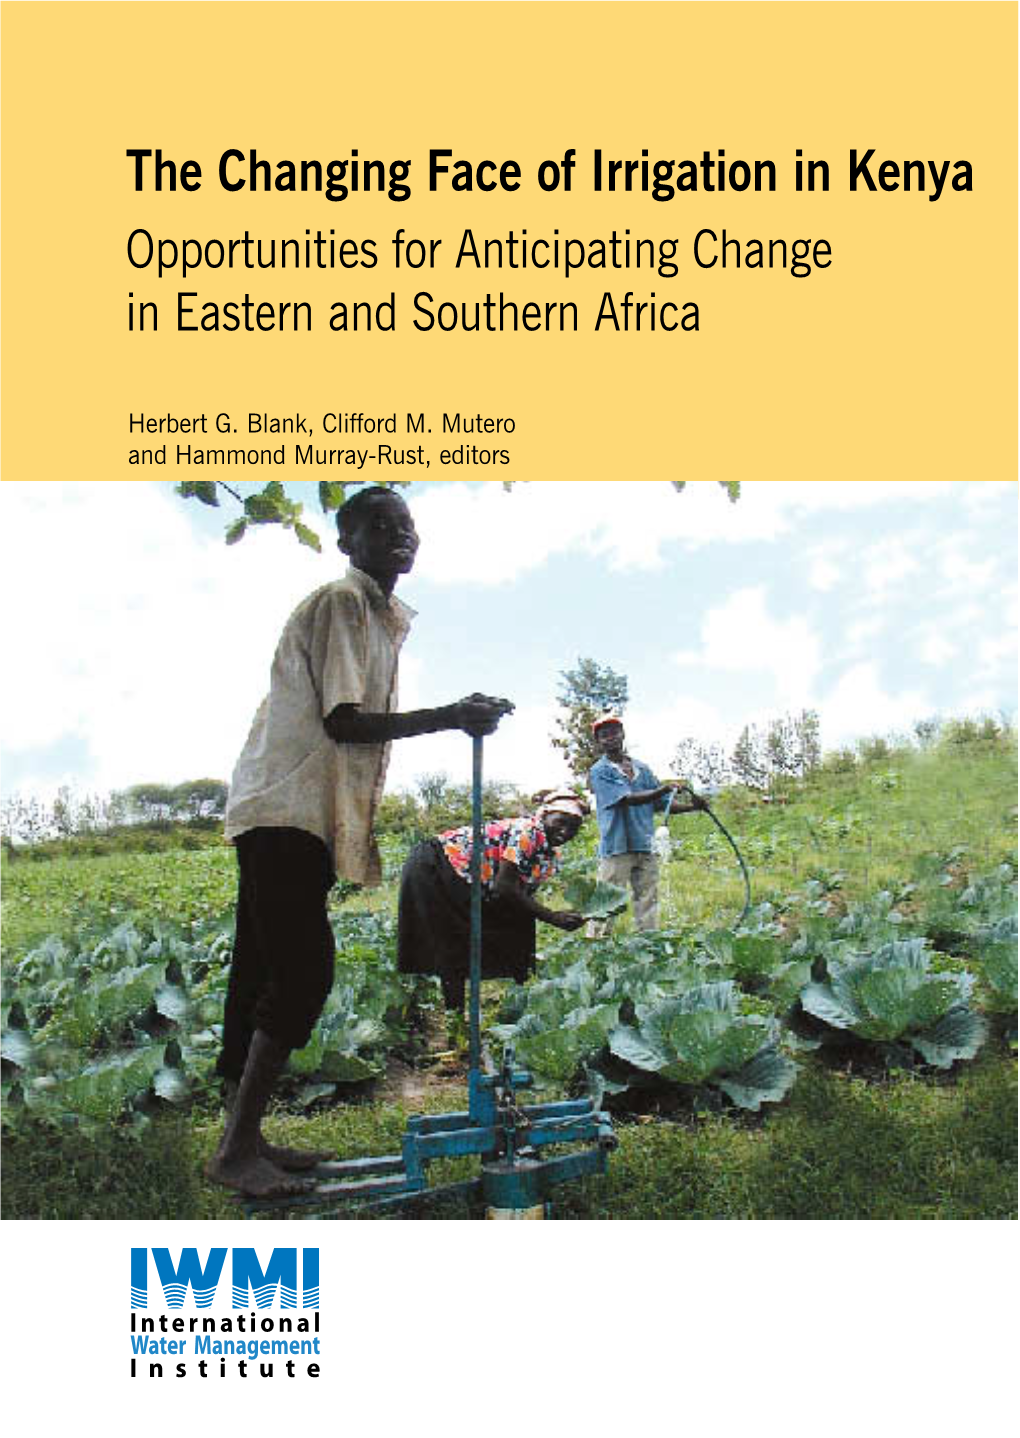 The Changing Face of Irrigation in Kenya: Opportunities for Anticipating Changes in Eastern and Southern Africa